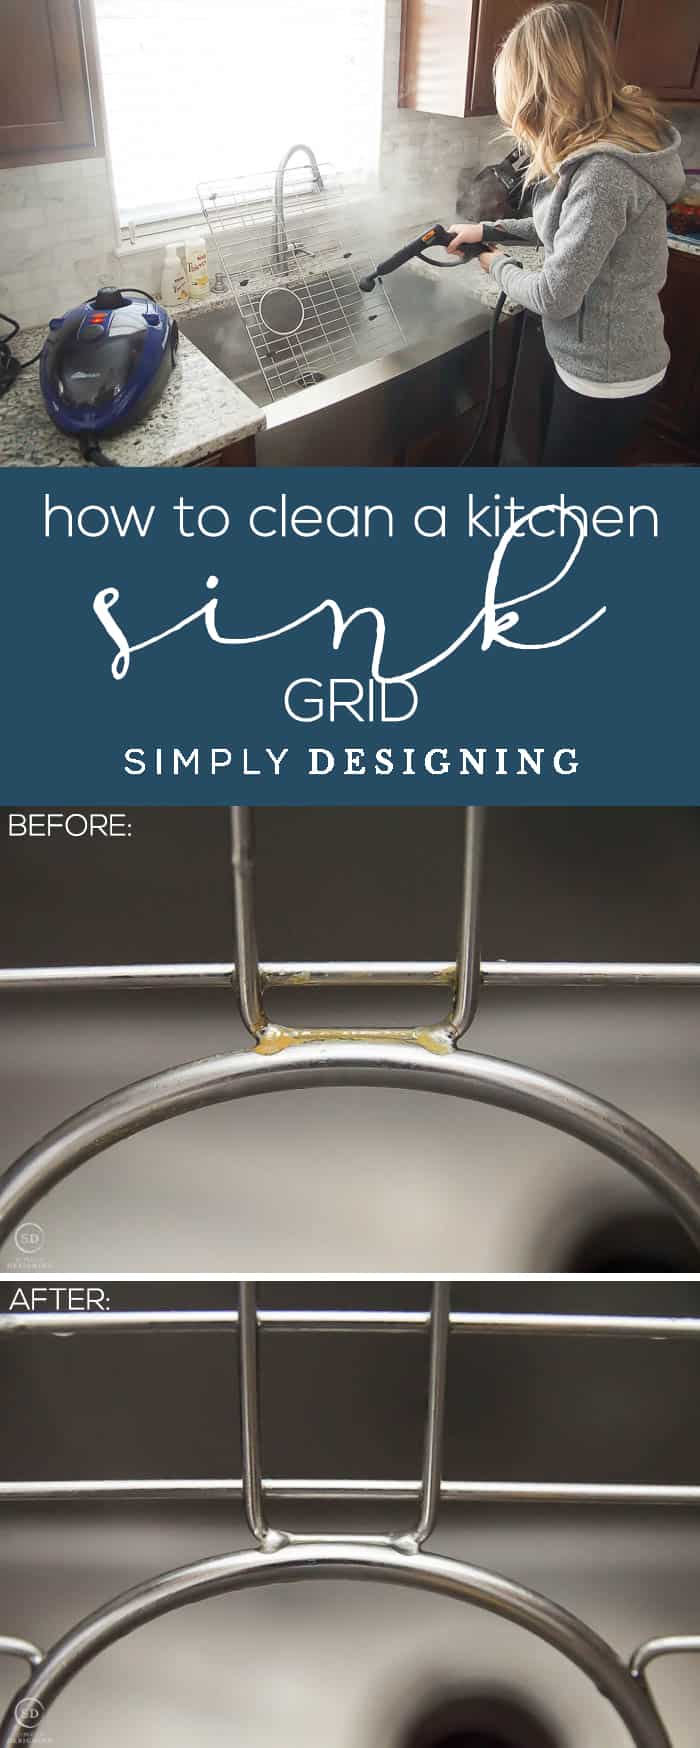 How to Clean a Kitchen Sink Grid - the easiest most effective way to clean and sanitize a kitchen sink grid